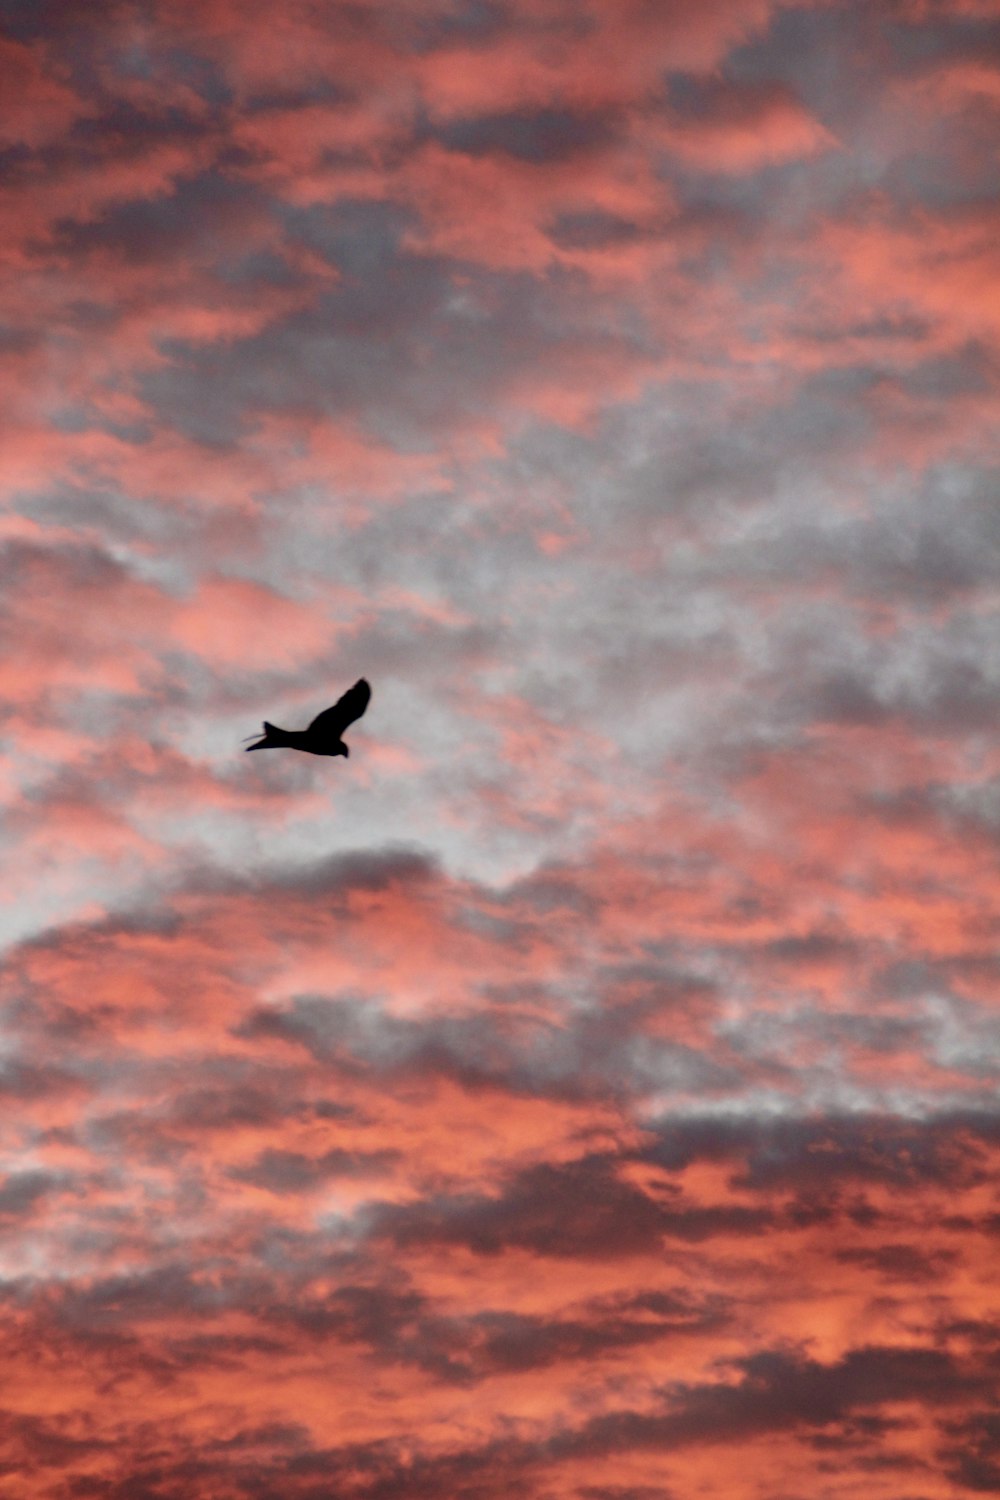 a plane flying through a cloudy sky at sunset